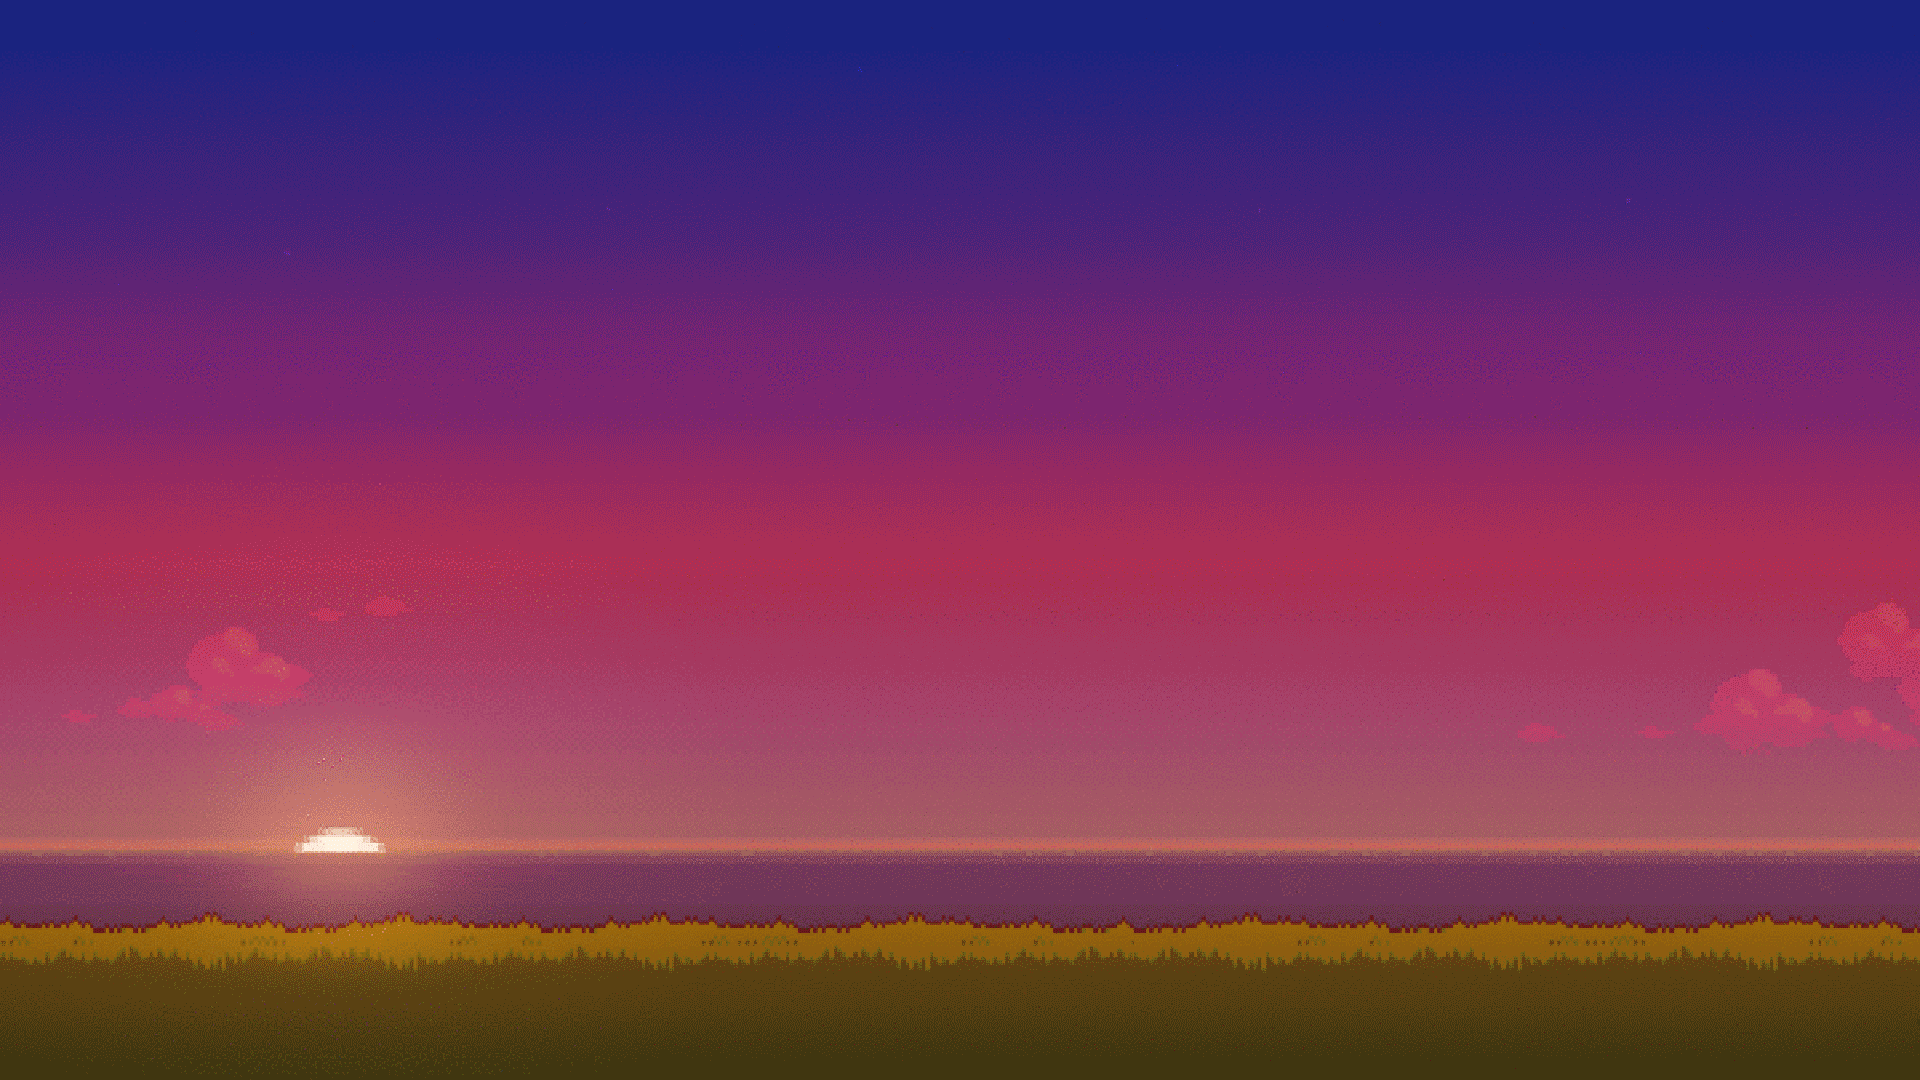 I turned the bit day wallpaper into a gif green background video gif background pixel art